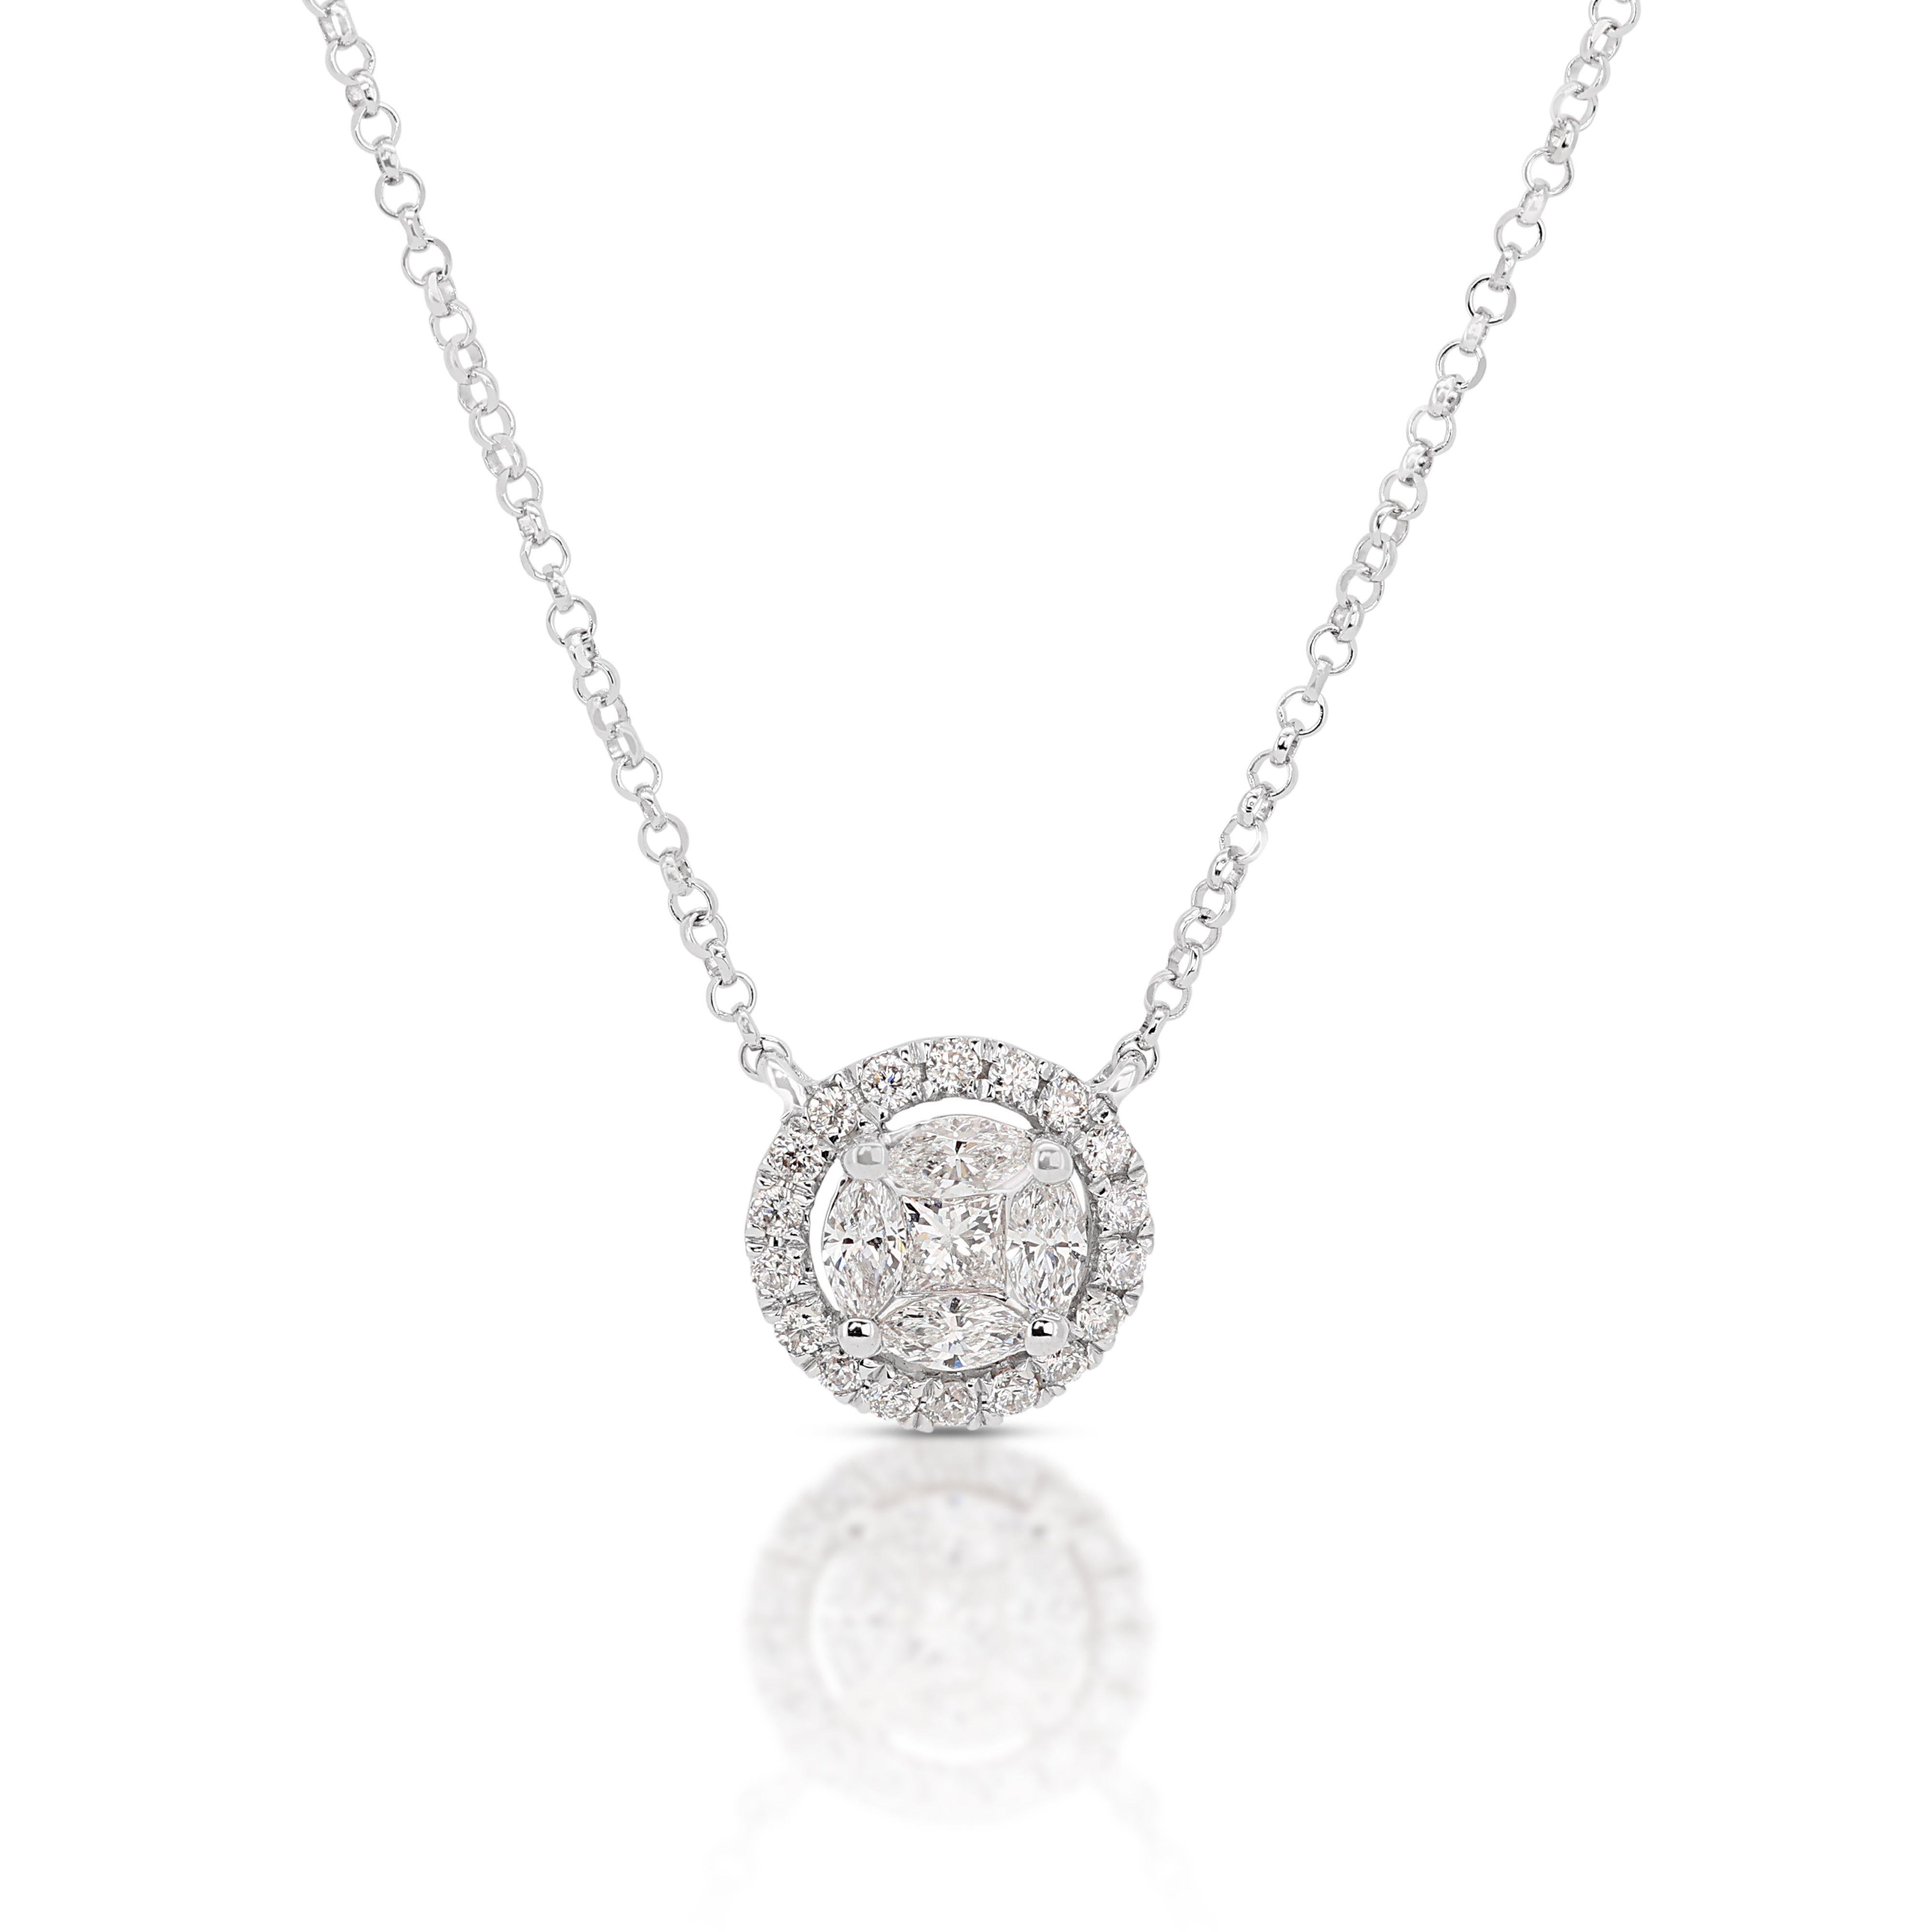 Round Cut 18K White Gold Diamond Necklace with 0.24 total carat weight